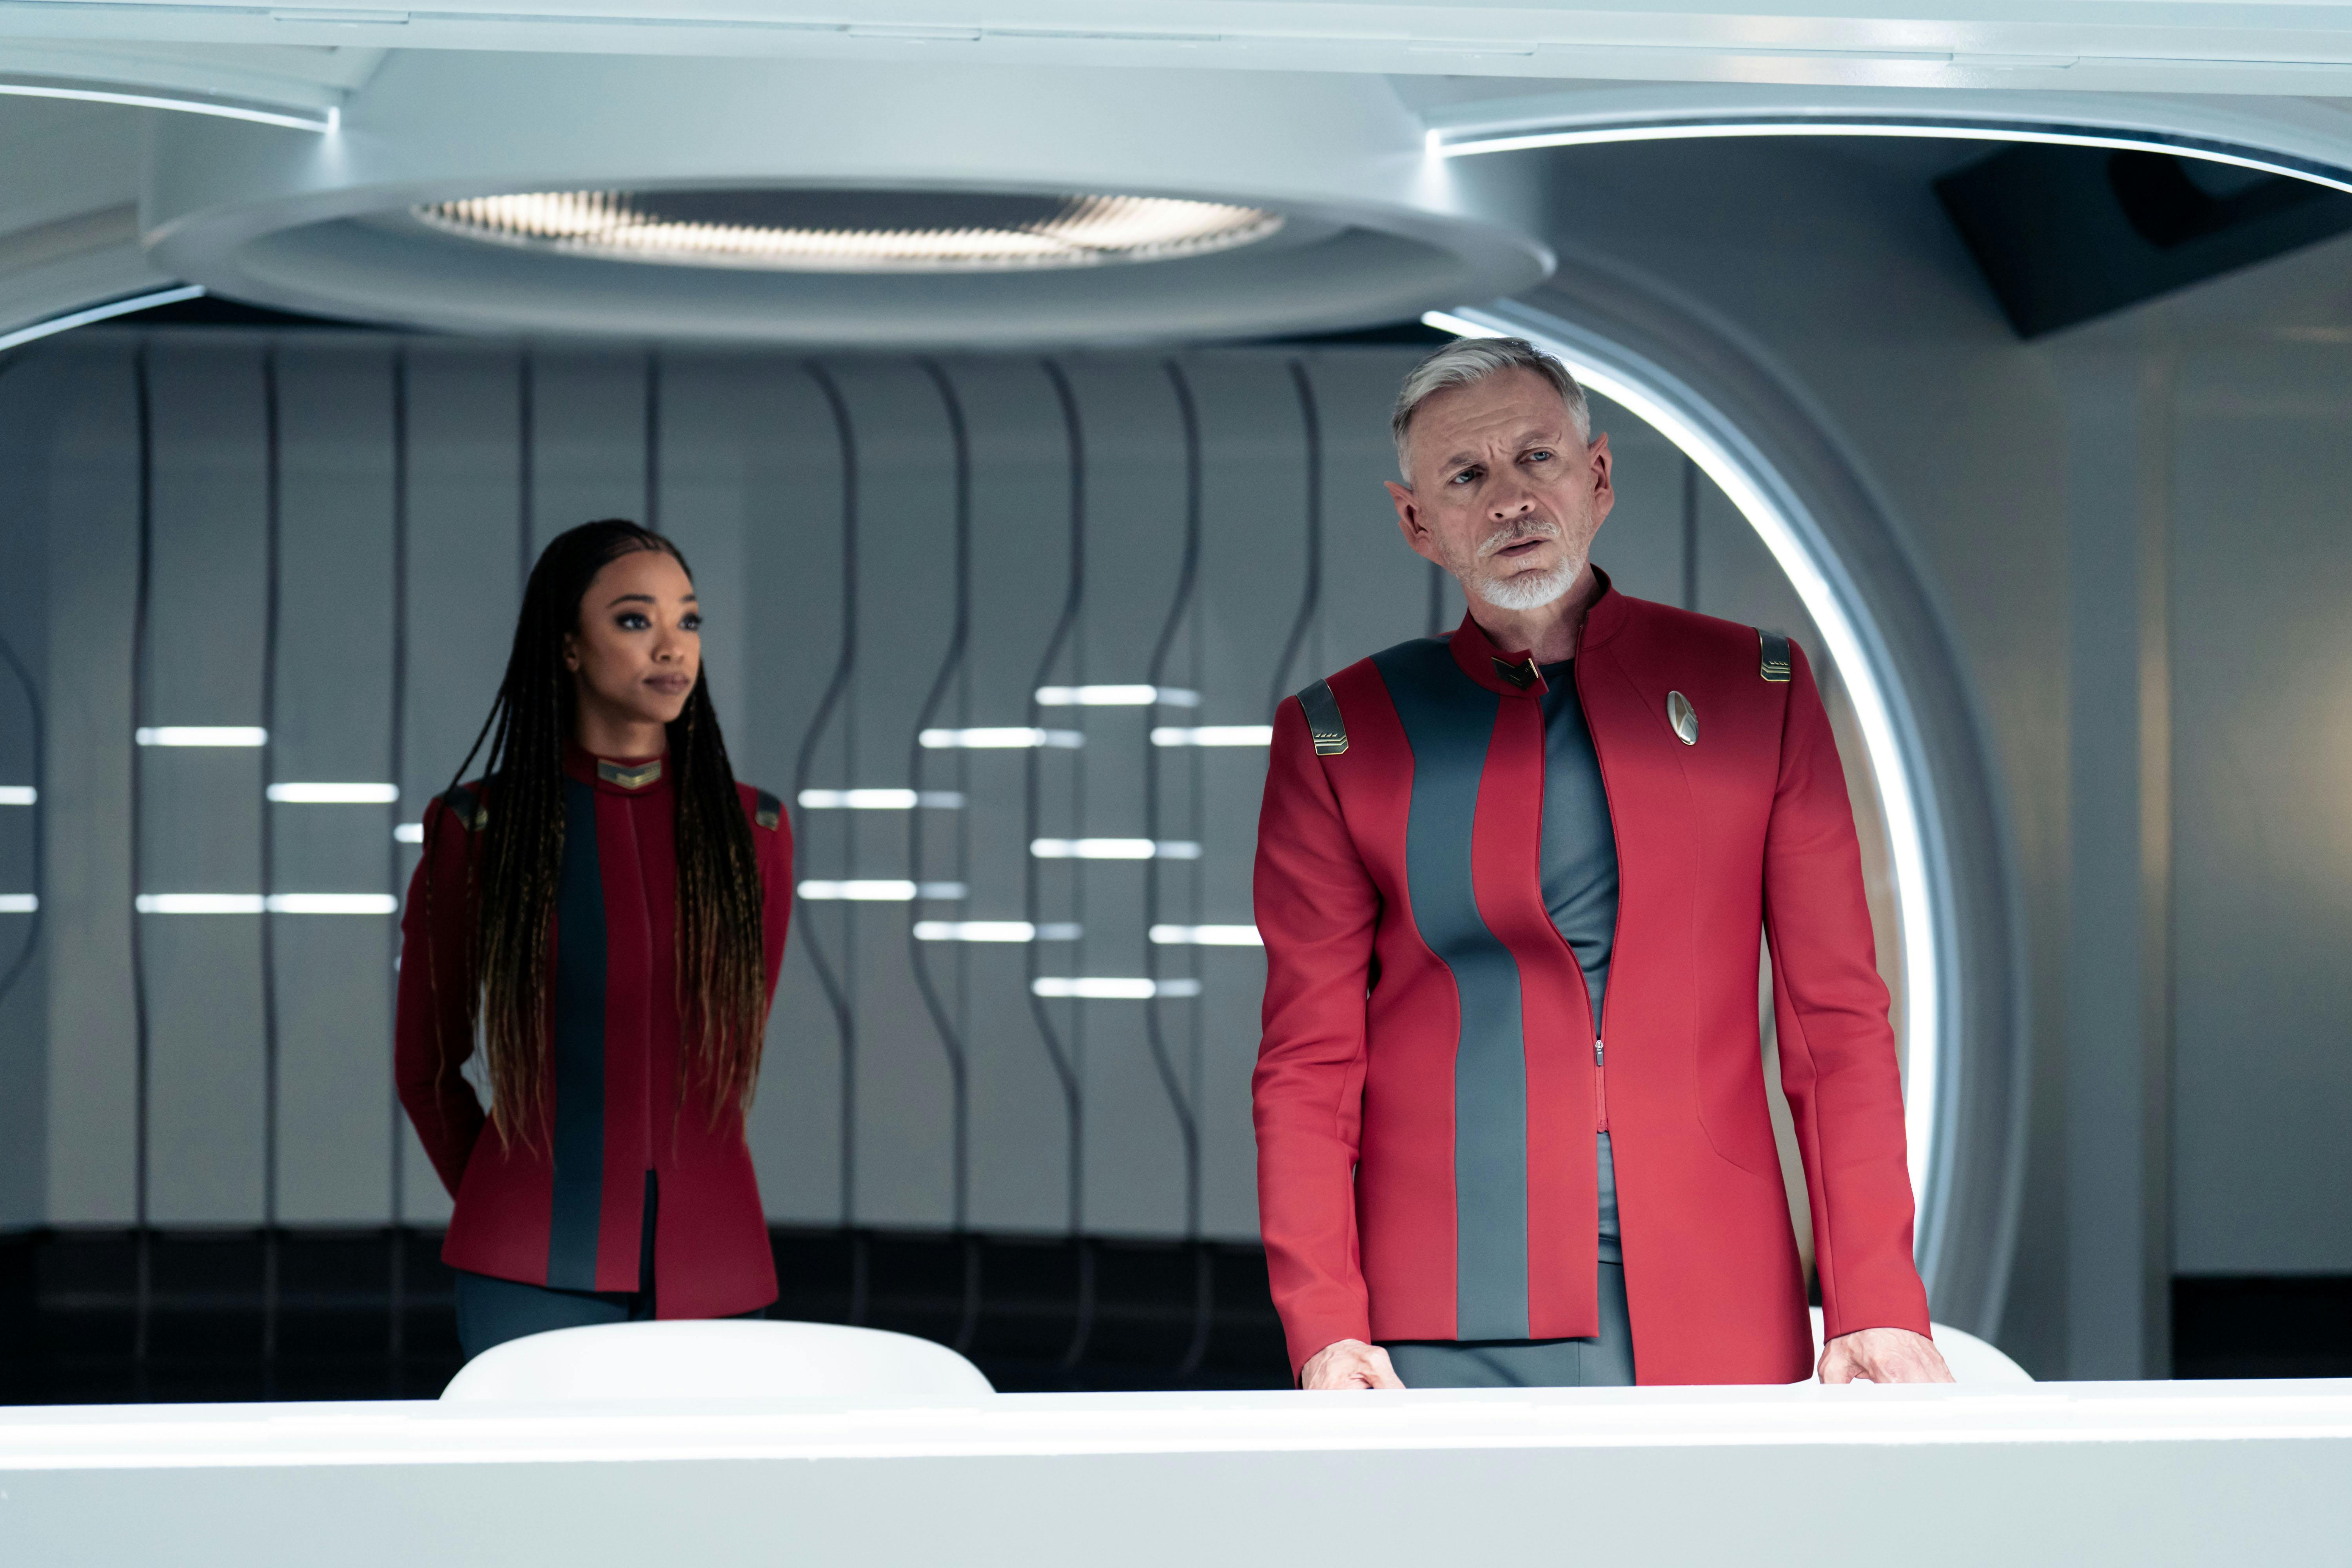 Burnham approaches Rayner, who has loosened his Starfleet uniform, as he looks out the window towards U.S.S. Discovery in 'Under the Twin Moons'